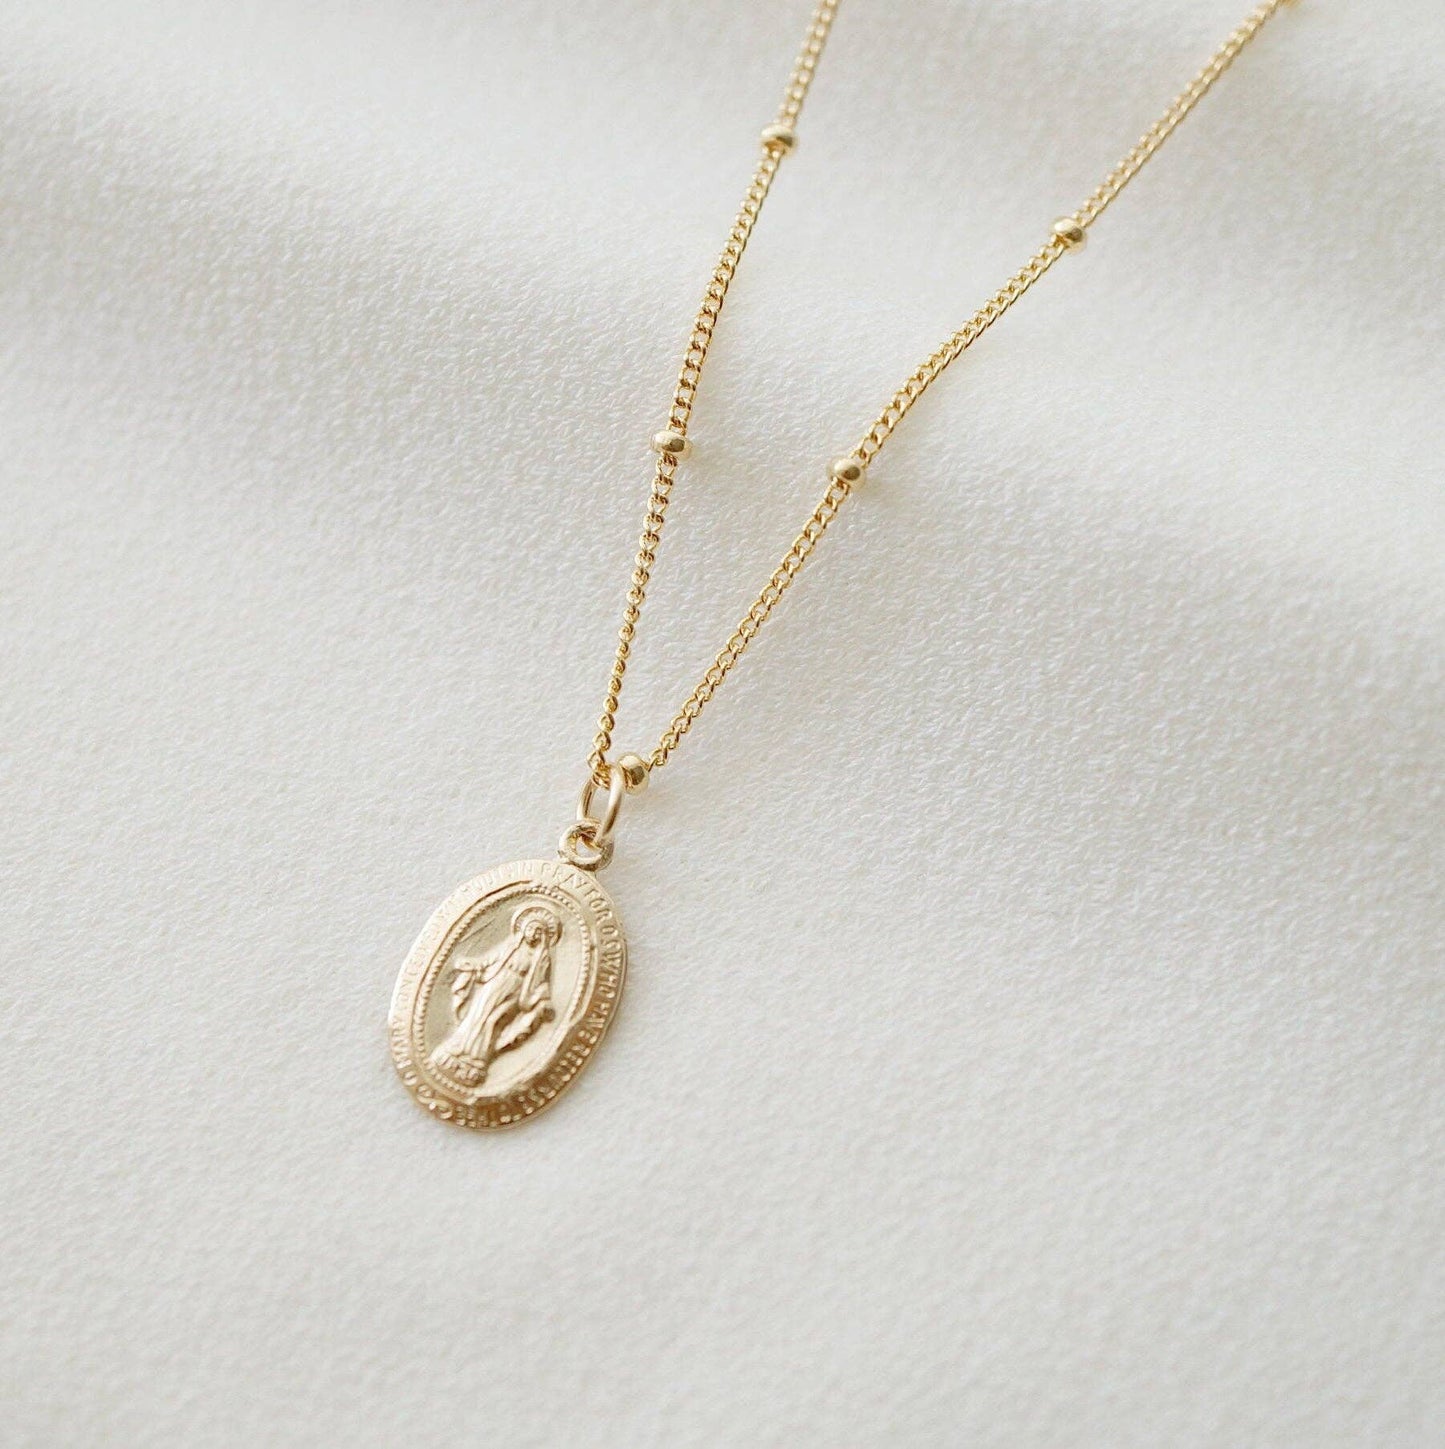 Blessed Mother Virgin Mary Religious 14K Gold fill Necklace: 14K Gold Fill / 16" Satellite